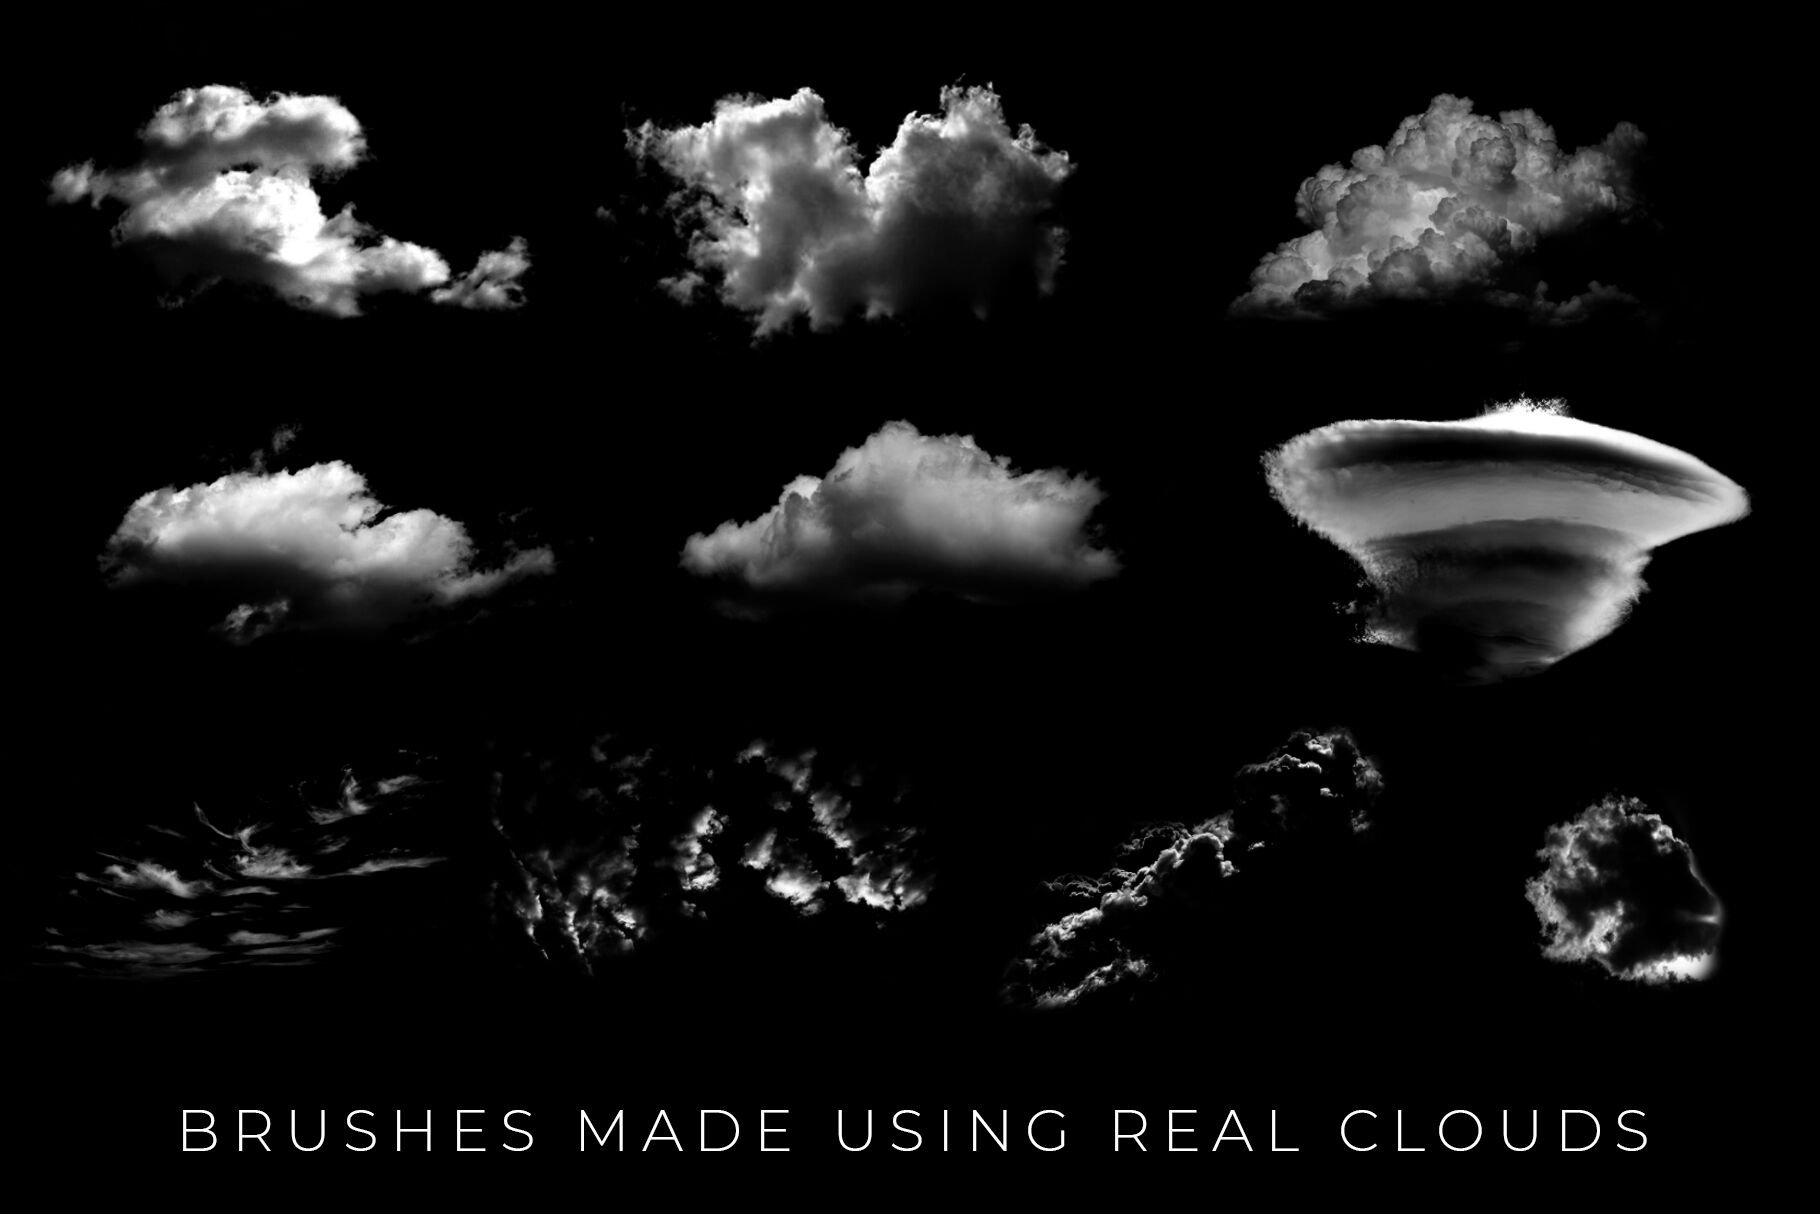 How-To: Make A Realistic Cloud Sculpture - Make